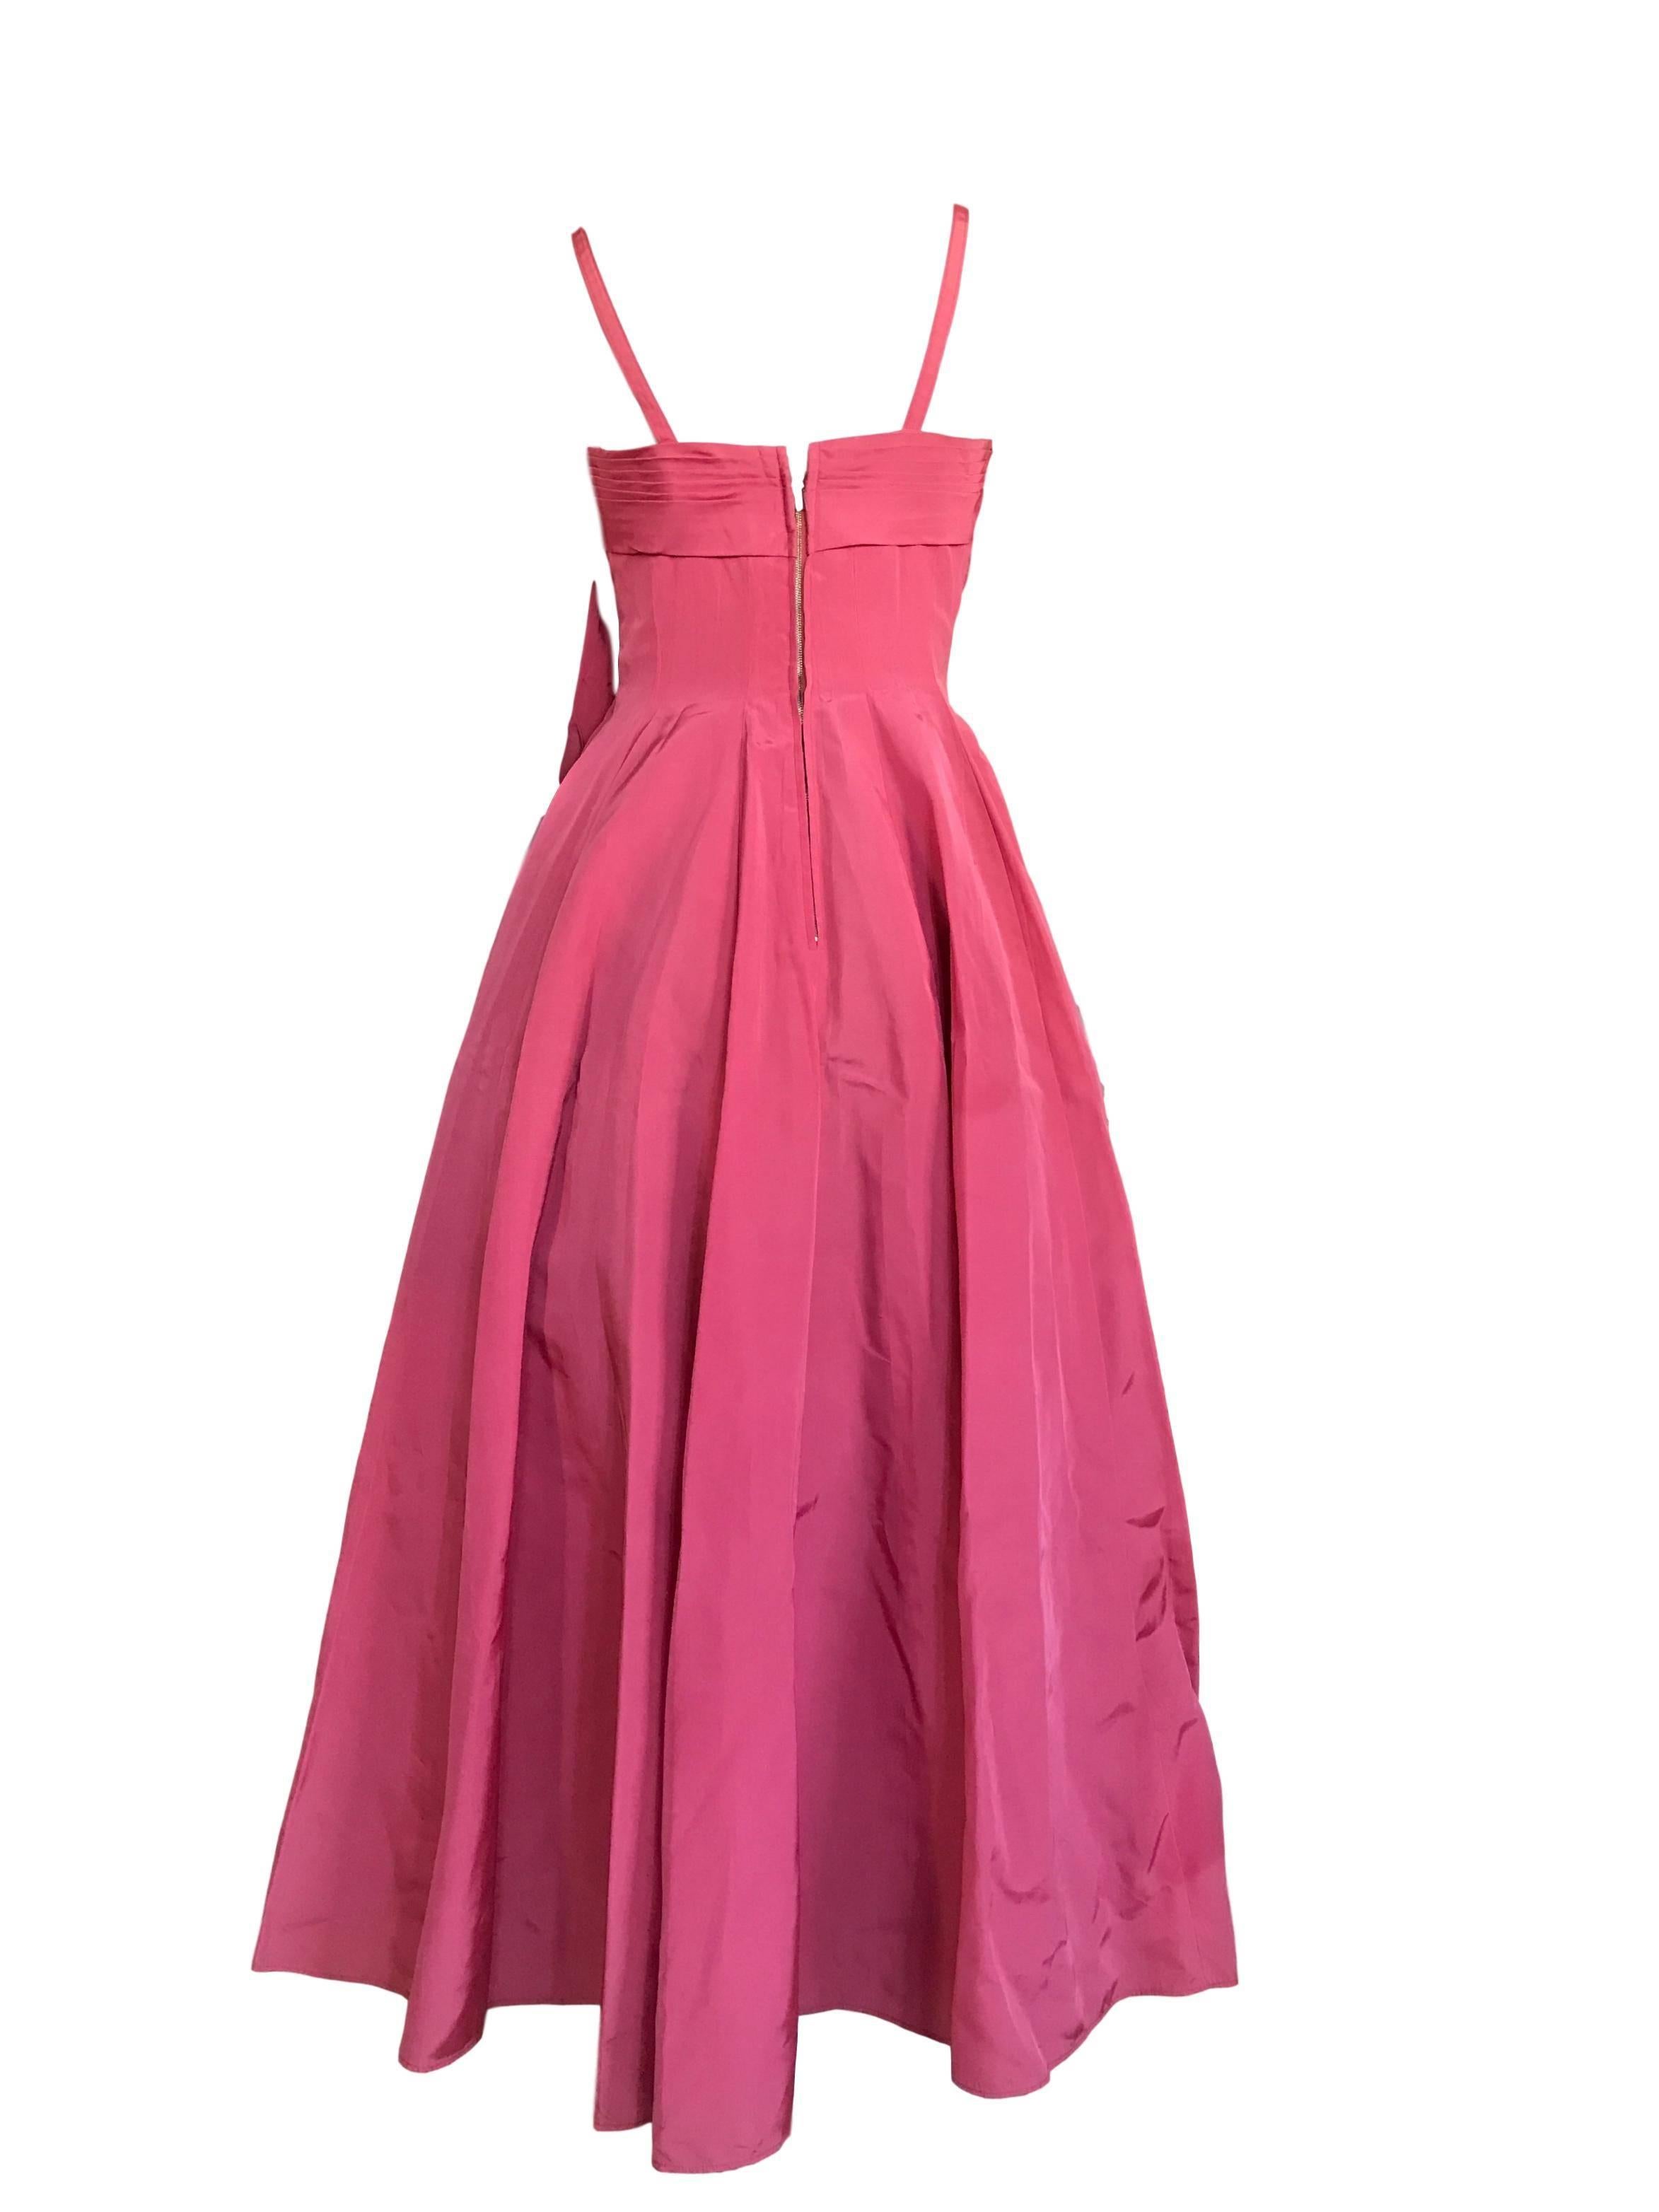 Norman Young late 50s early 1960s pink textured taffeta cocktail dress, boned bodice, metal zip entry and thin shoulder straps, a fabulous and typical mid century occasion dress. 

Excellent condition.

Fits a UK 8/10, measuring laid flat 17.5